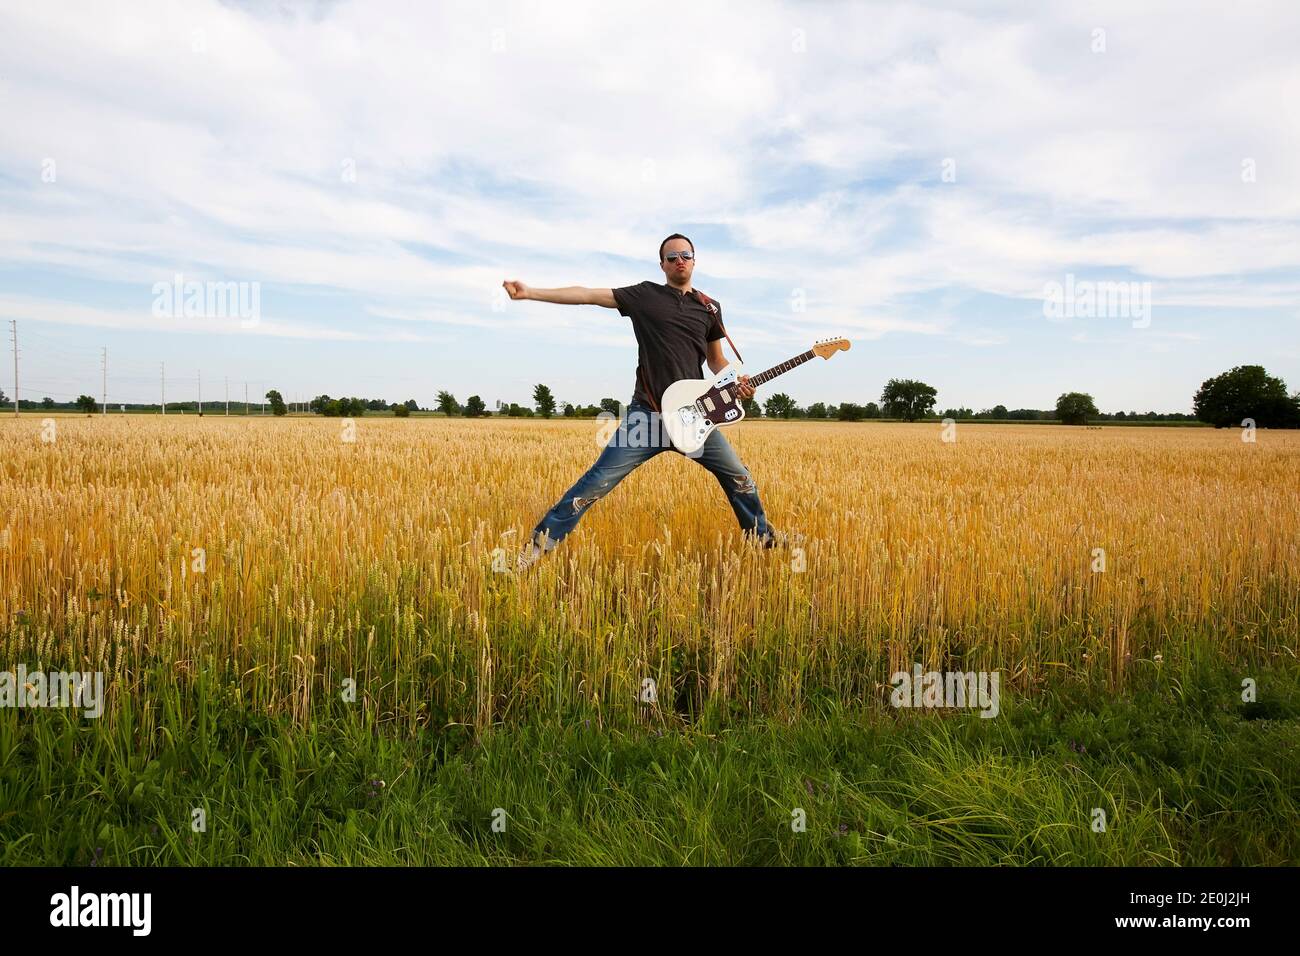 Guy Playing Electric Guitar In Wheat Field Stock Photo